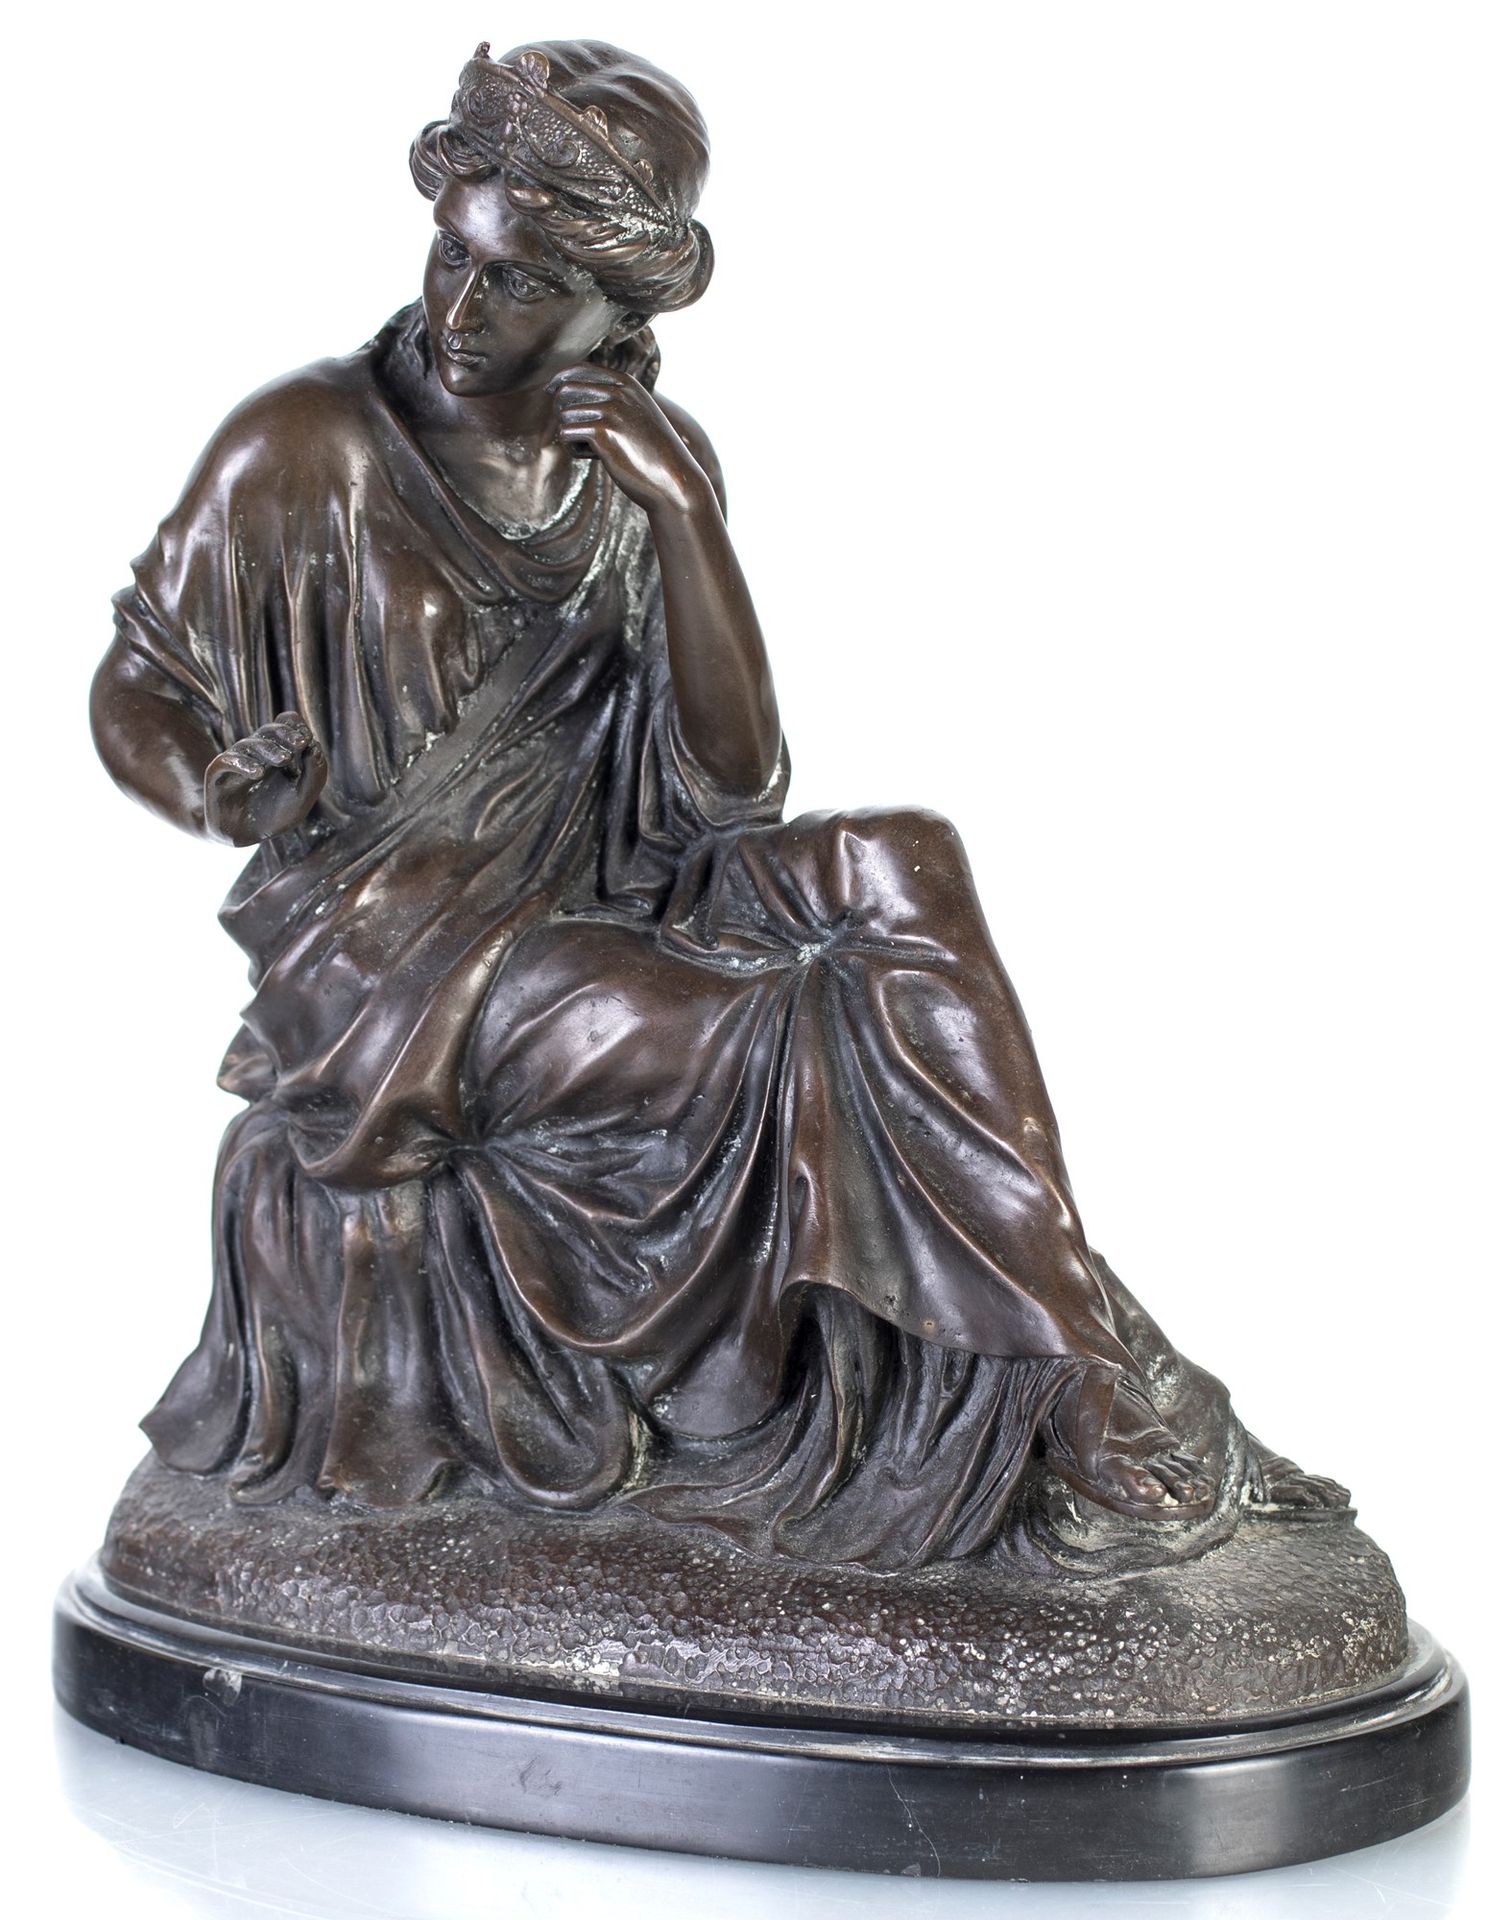 Burnished bronze sculpture, 19th century depicting a seated woman taken from the&hellip;